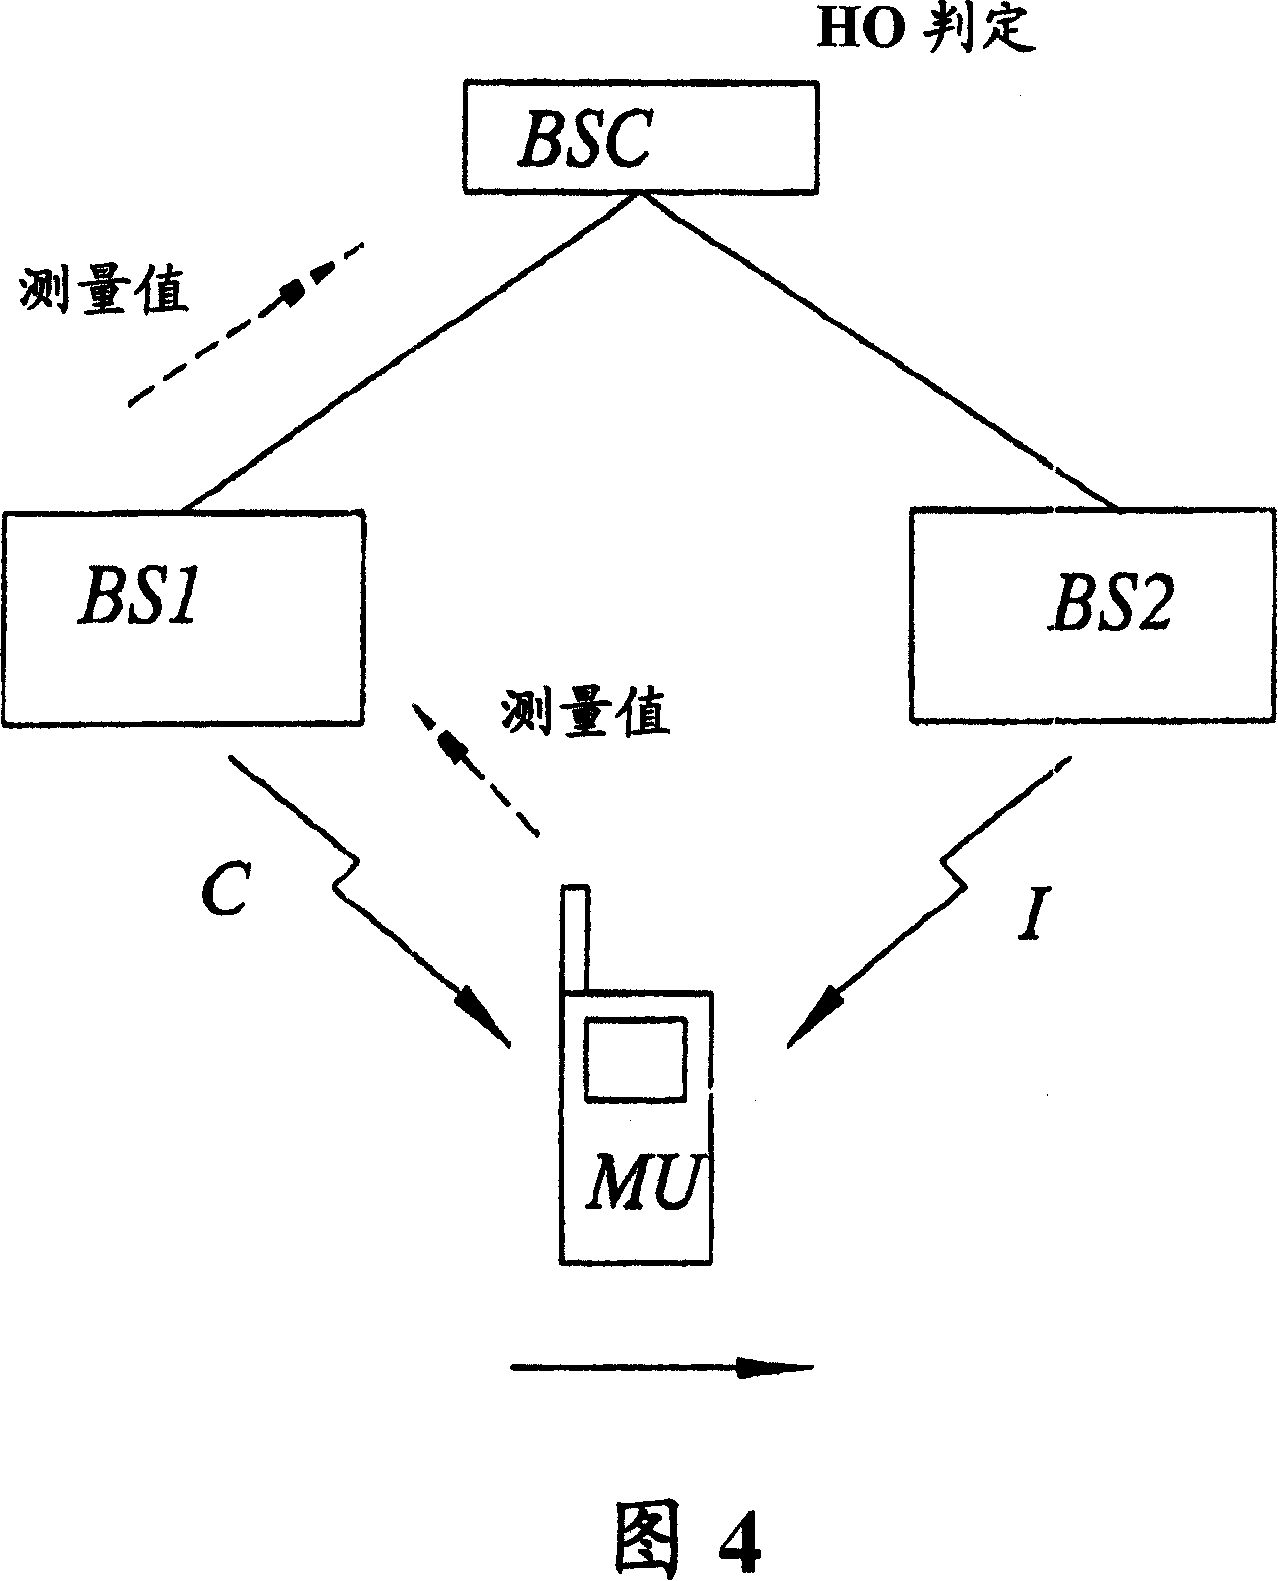 Method and arrangement for improved handover by muting interfering nodes